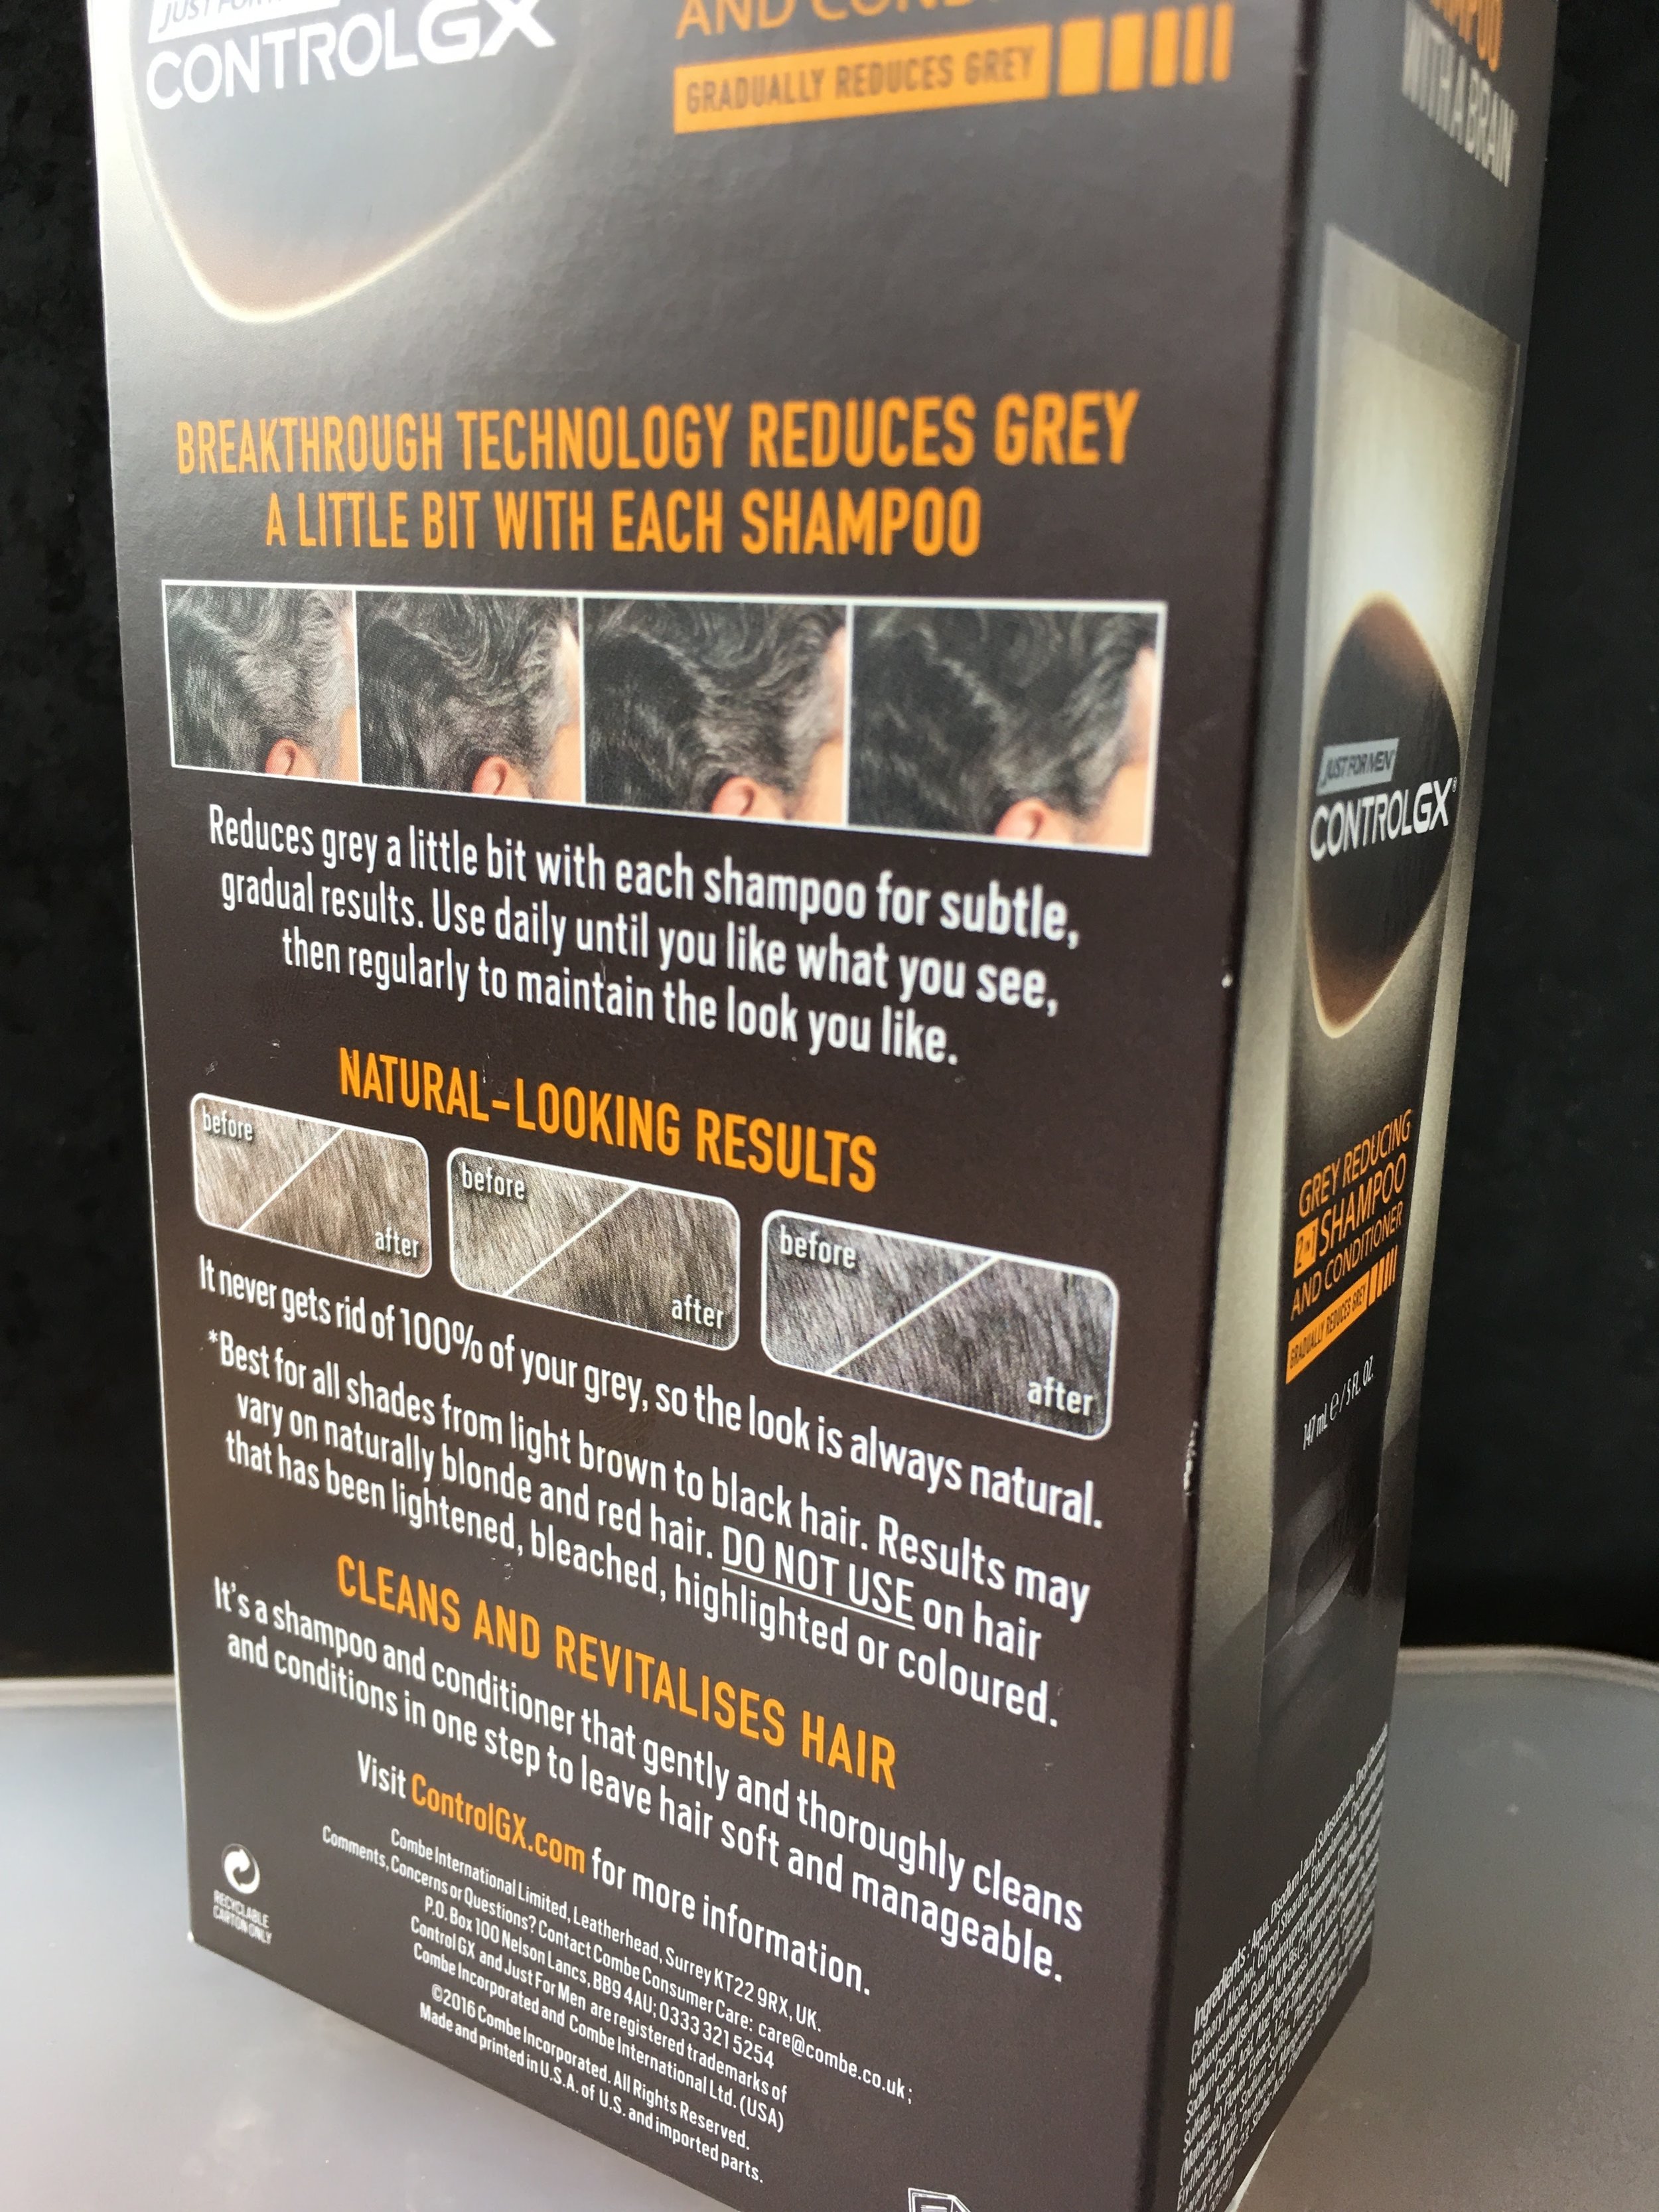 How to use Just For Men Control GX Grey Reducing Shampoo? — dapper & groomed